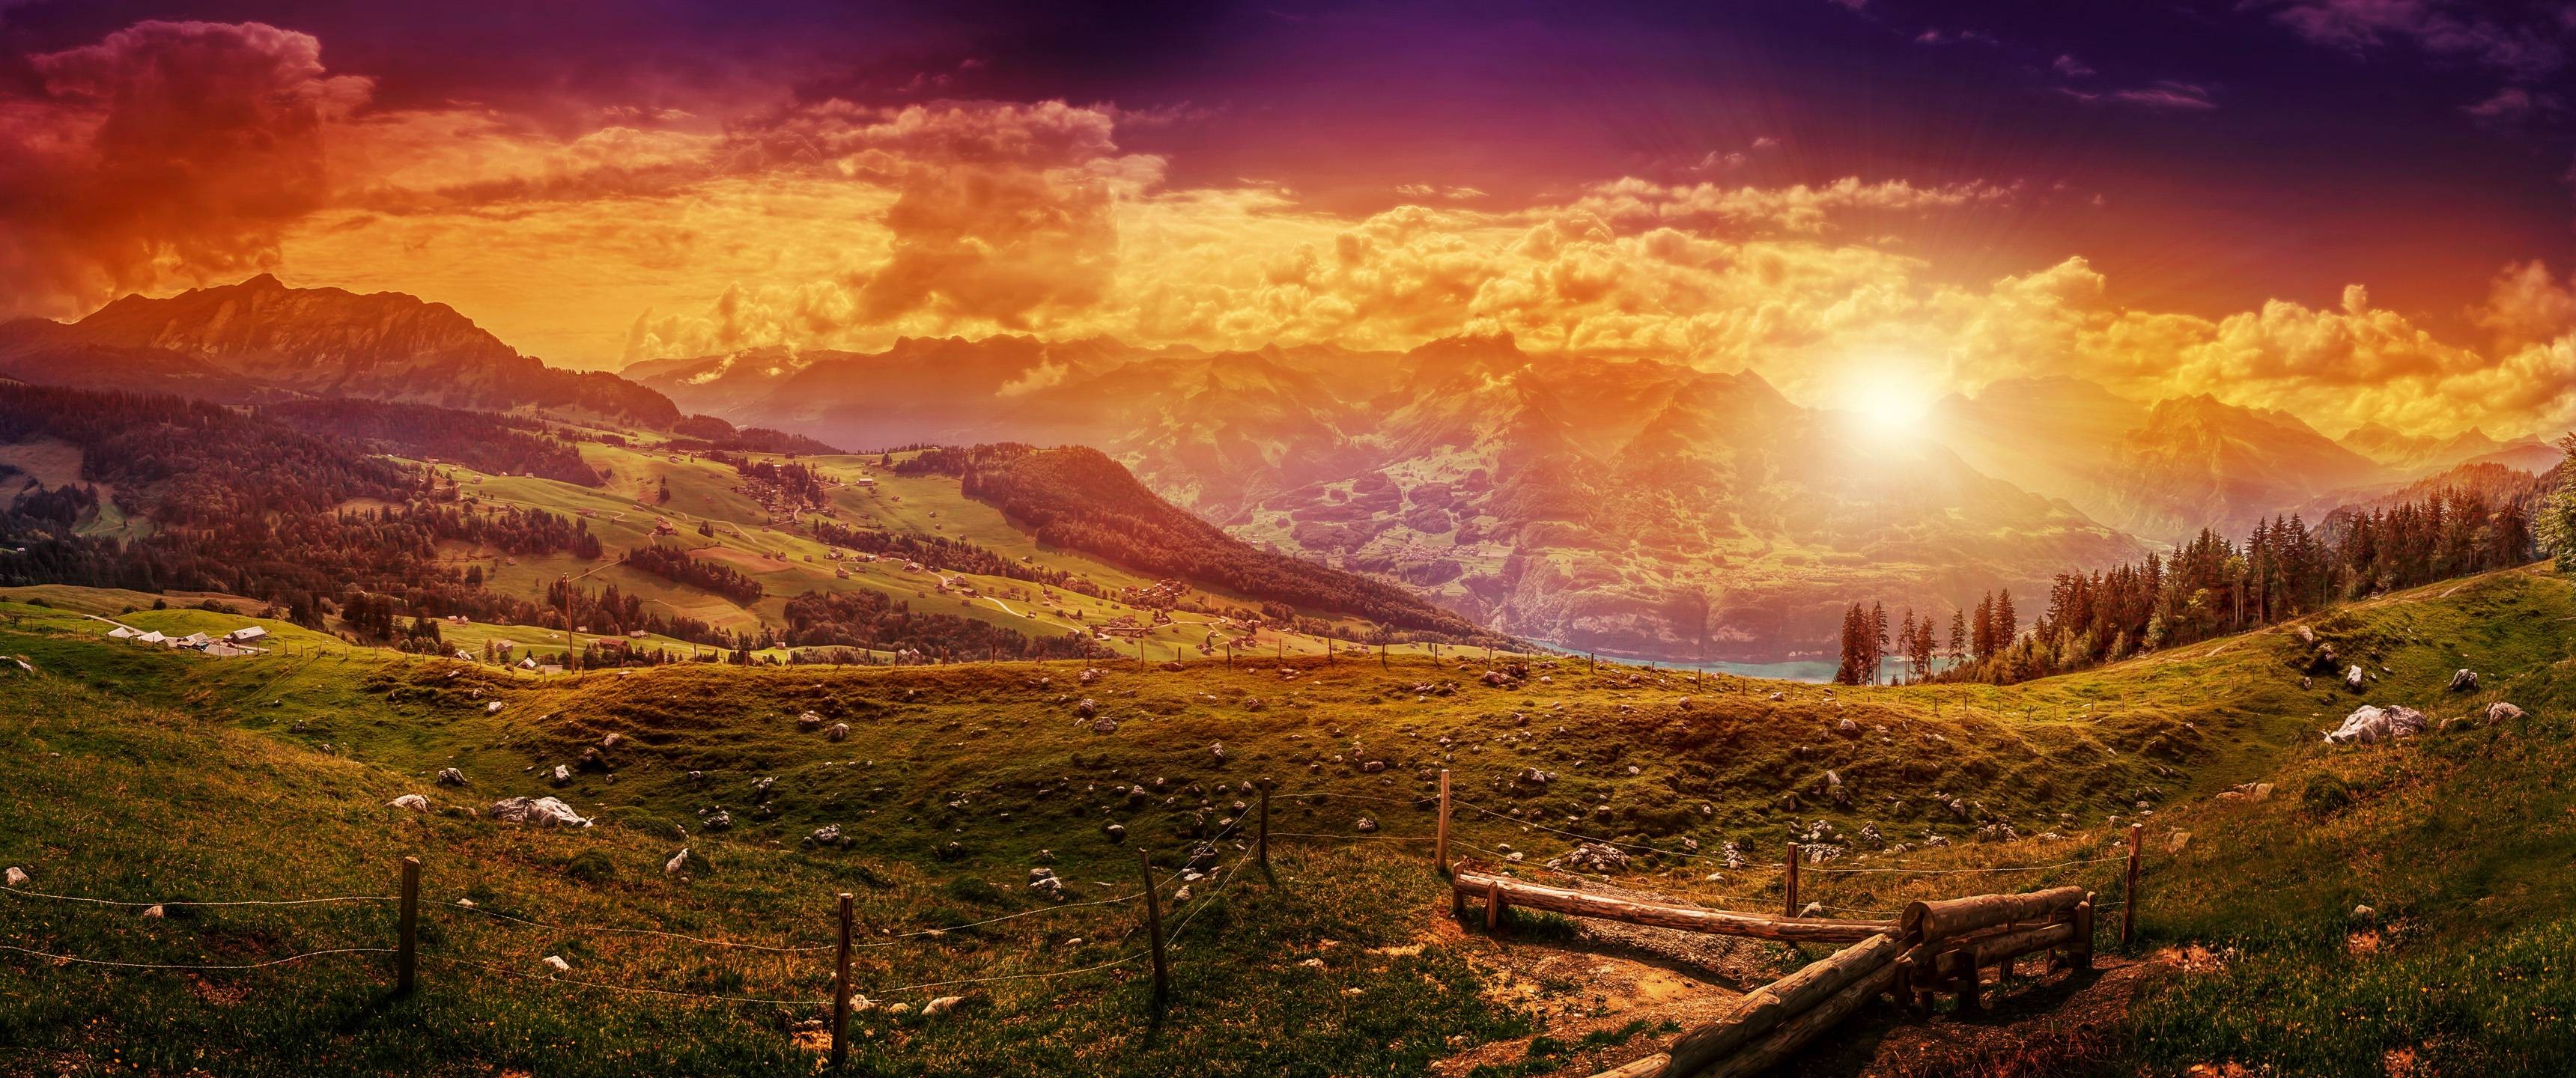 General 3440x1440 landscape nature colorful mountains sky sunlight